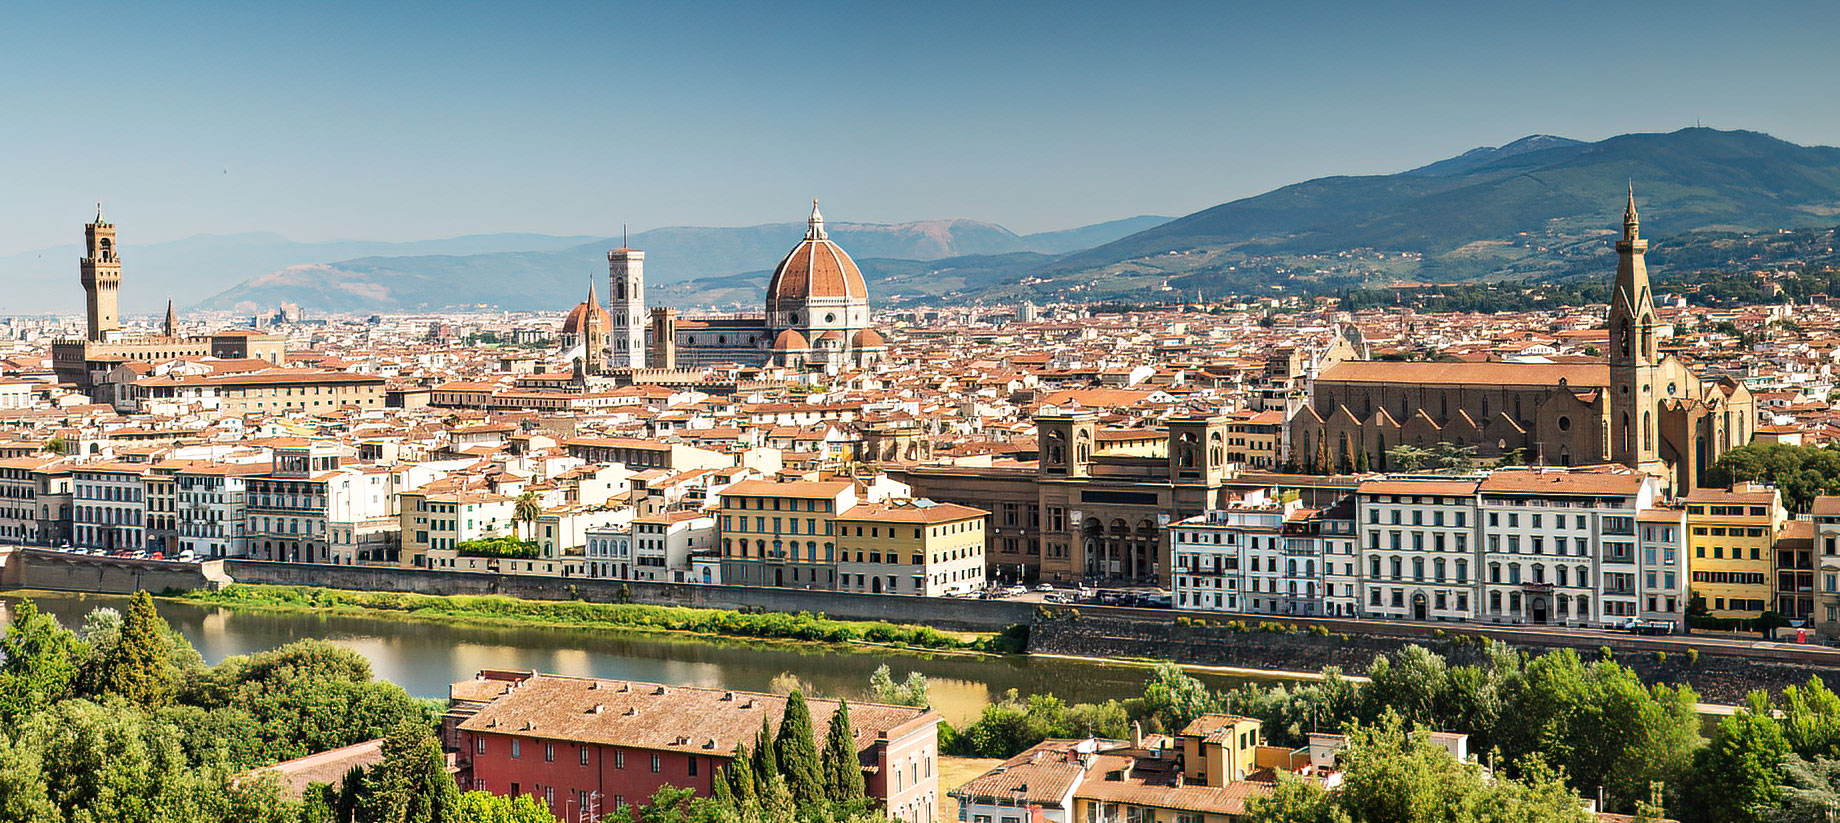 Panoramic View of Florence, Tuscany, Italy Across the Arno River